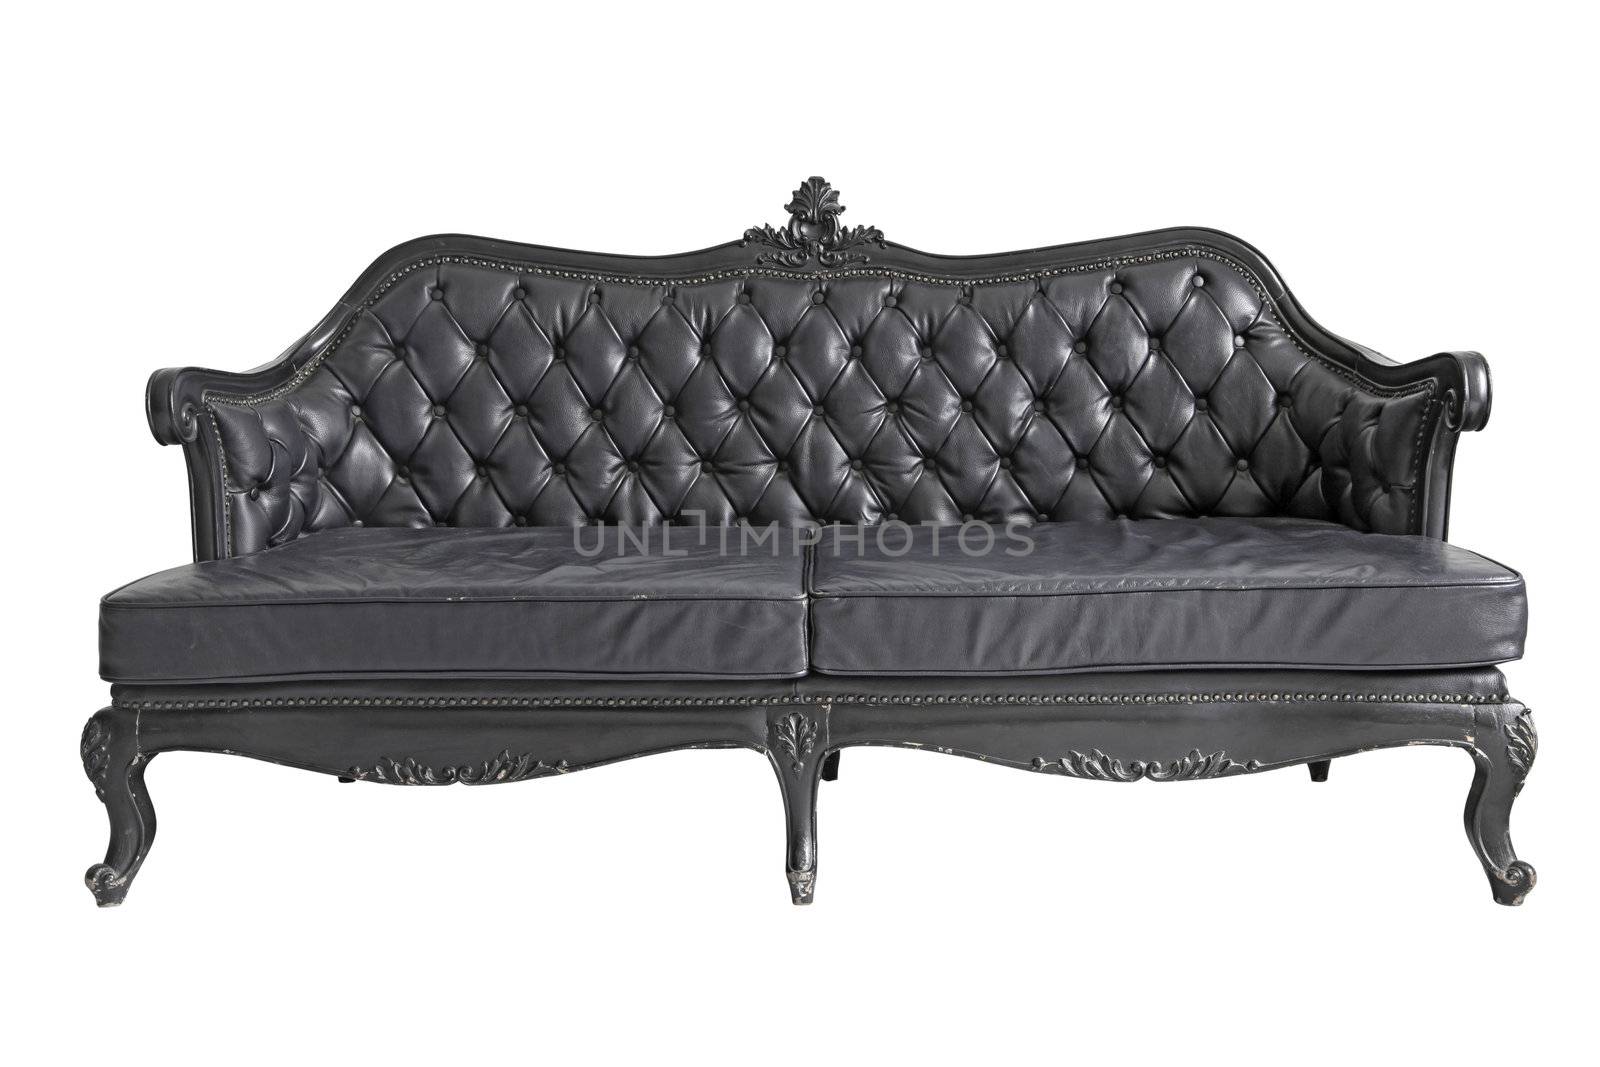 isolated Armchair black genuine leather classical style sofa with clipping path